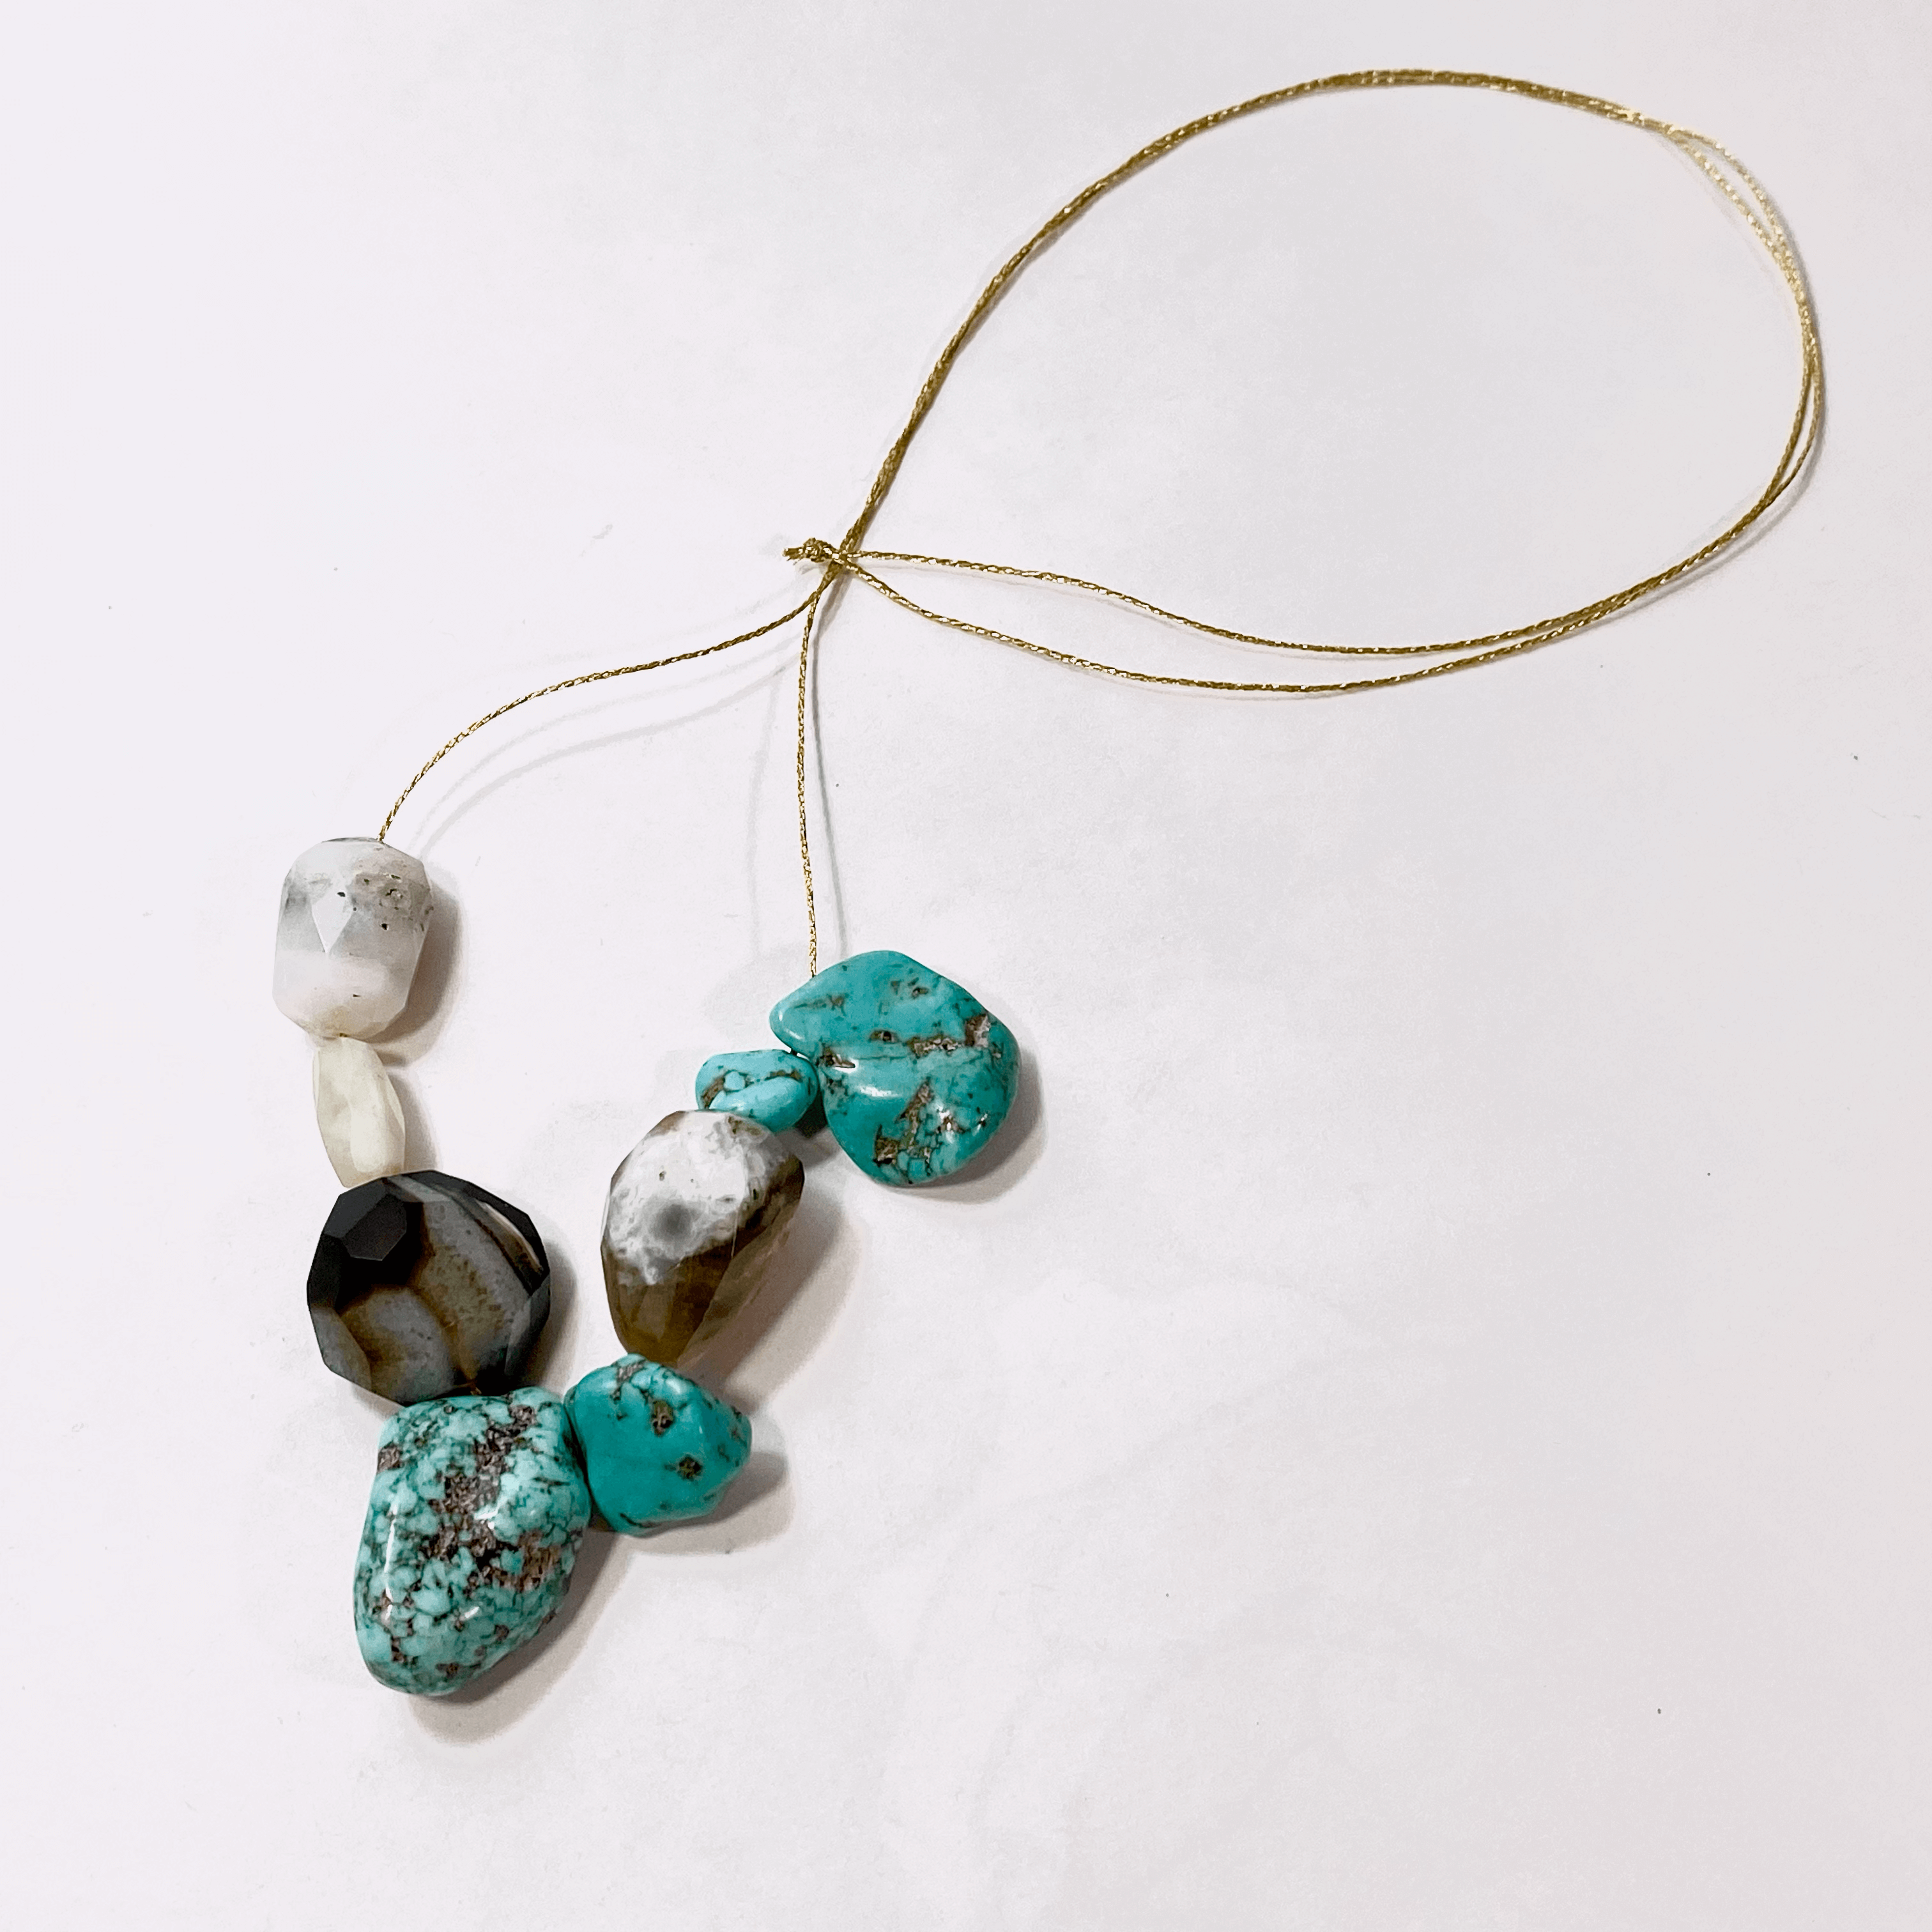 Boötes Turquoise and Onyx Necklace